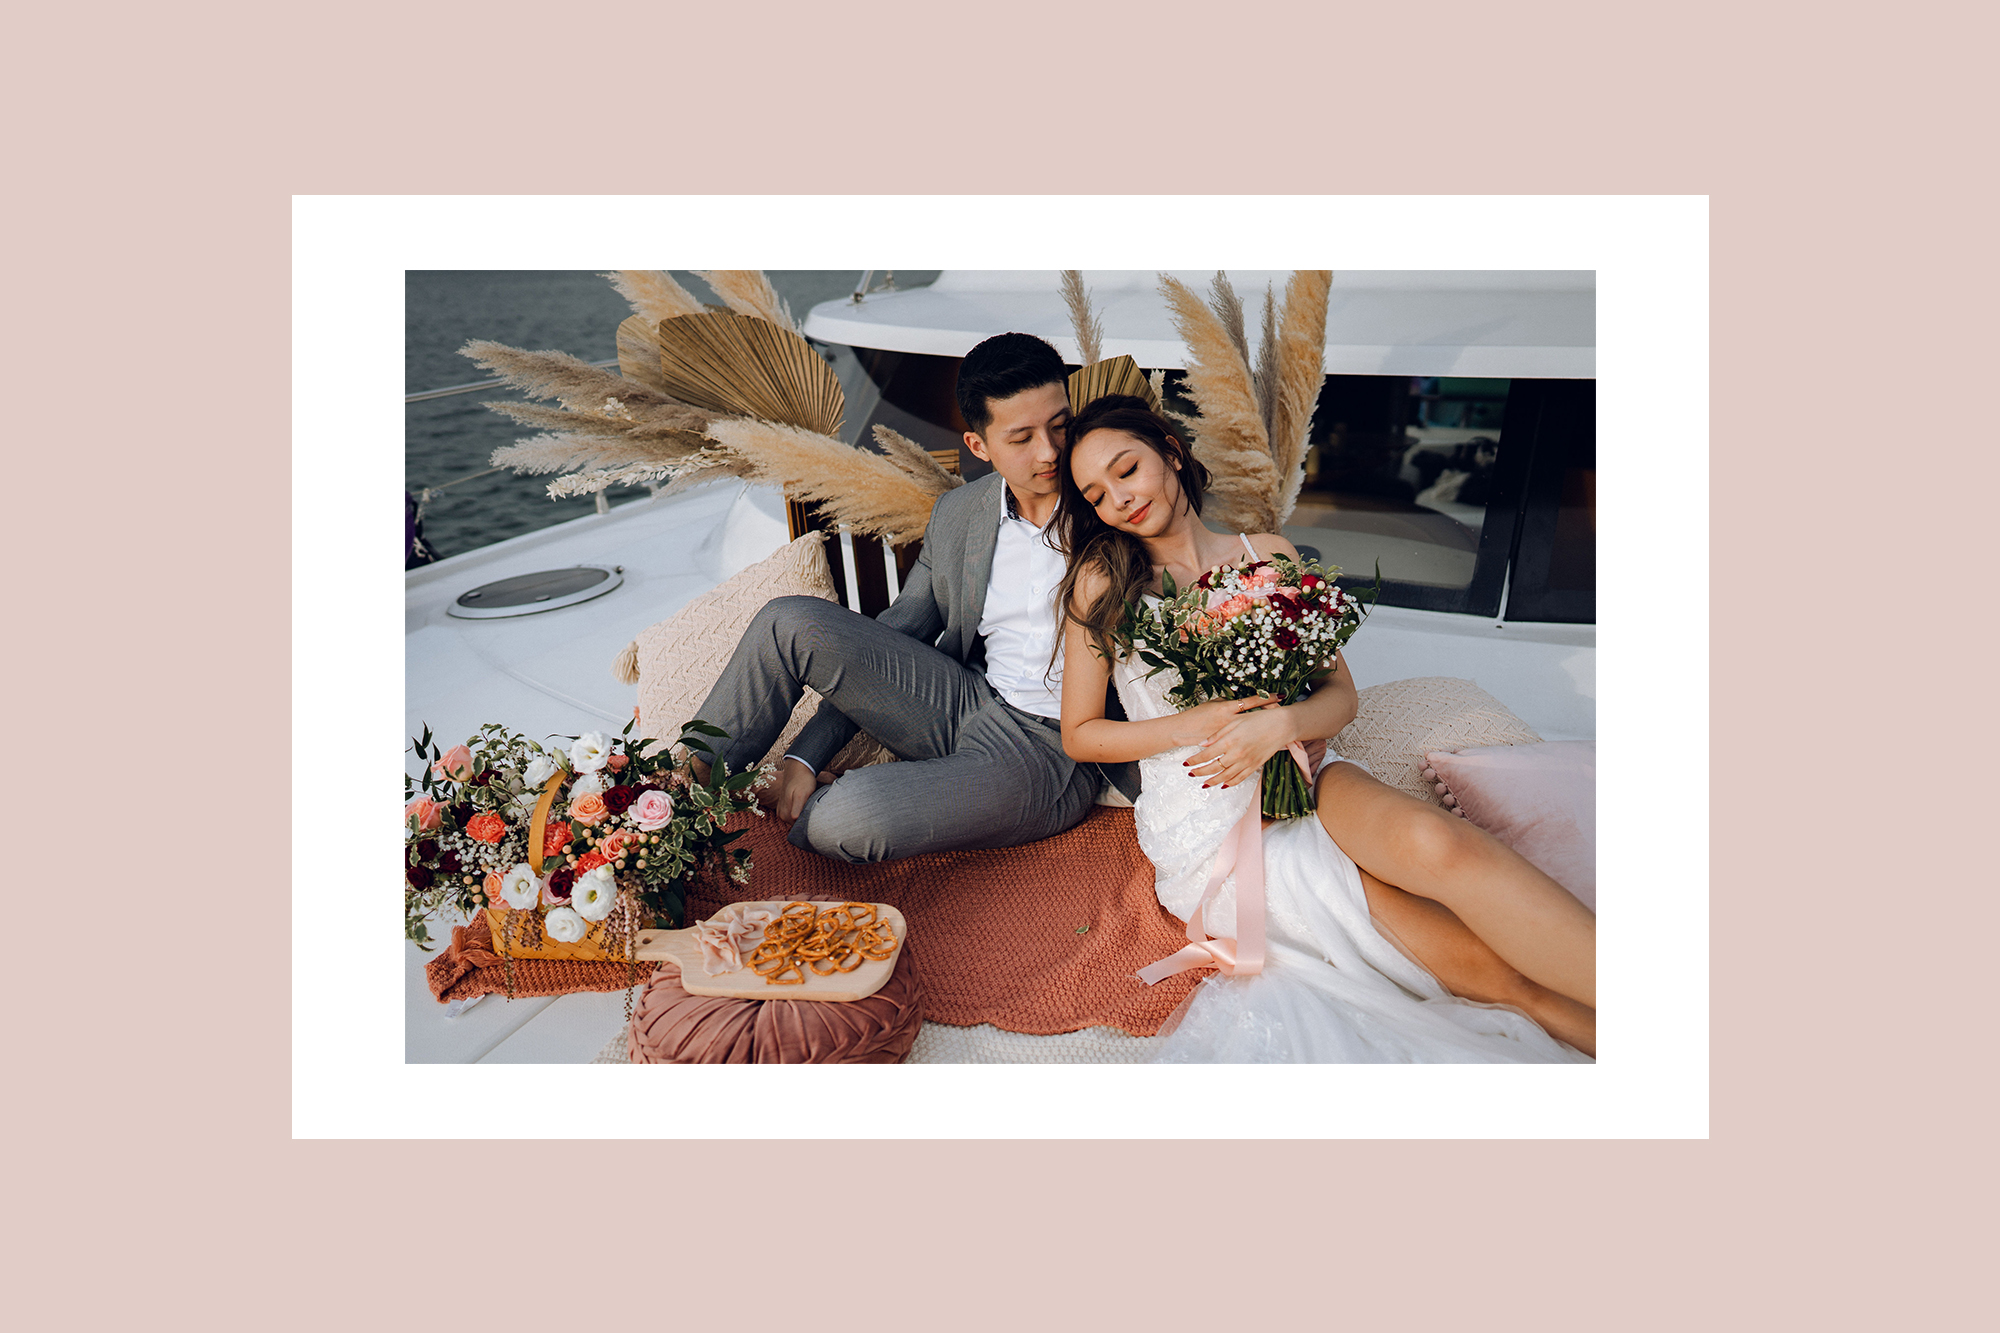 Sunset Prewedding Photoshoot On A Yacht With Romantic Floral Styling by Samantha on OneThreeOneFour 9